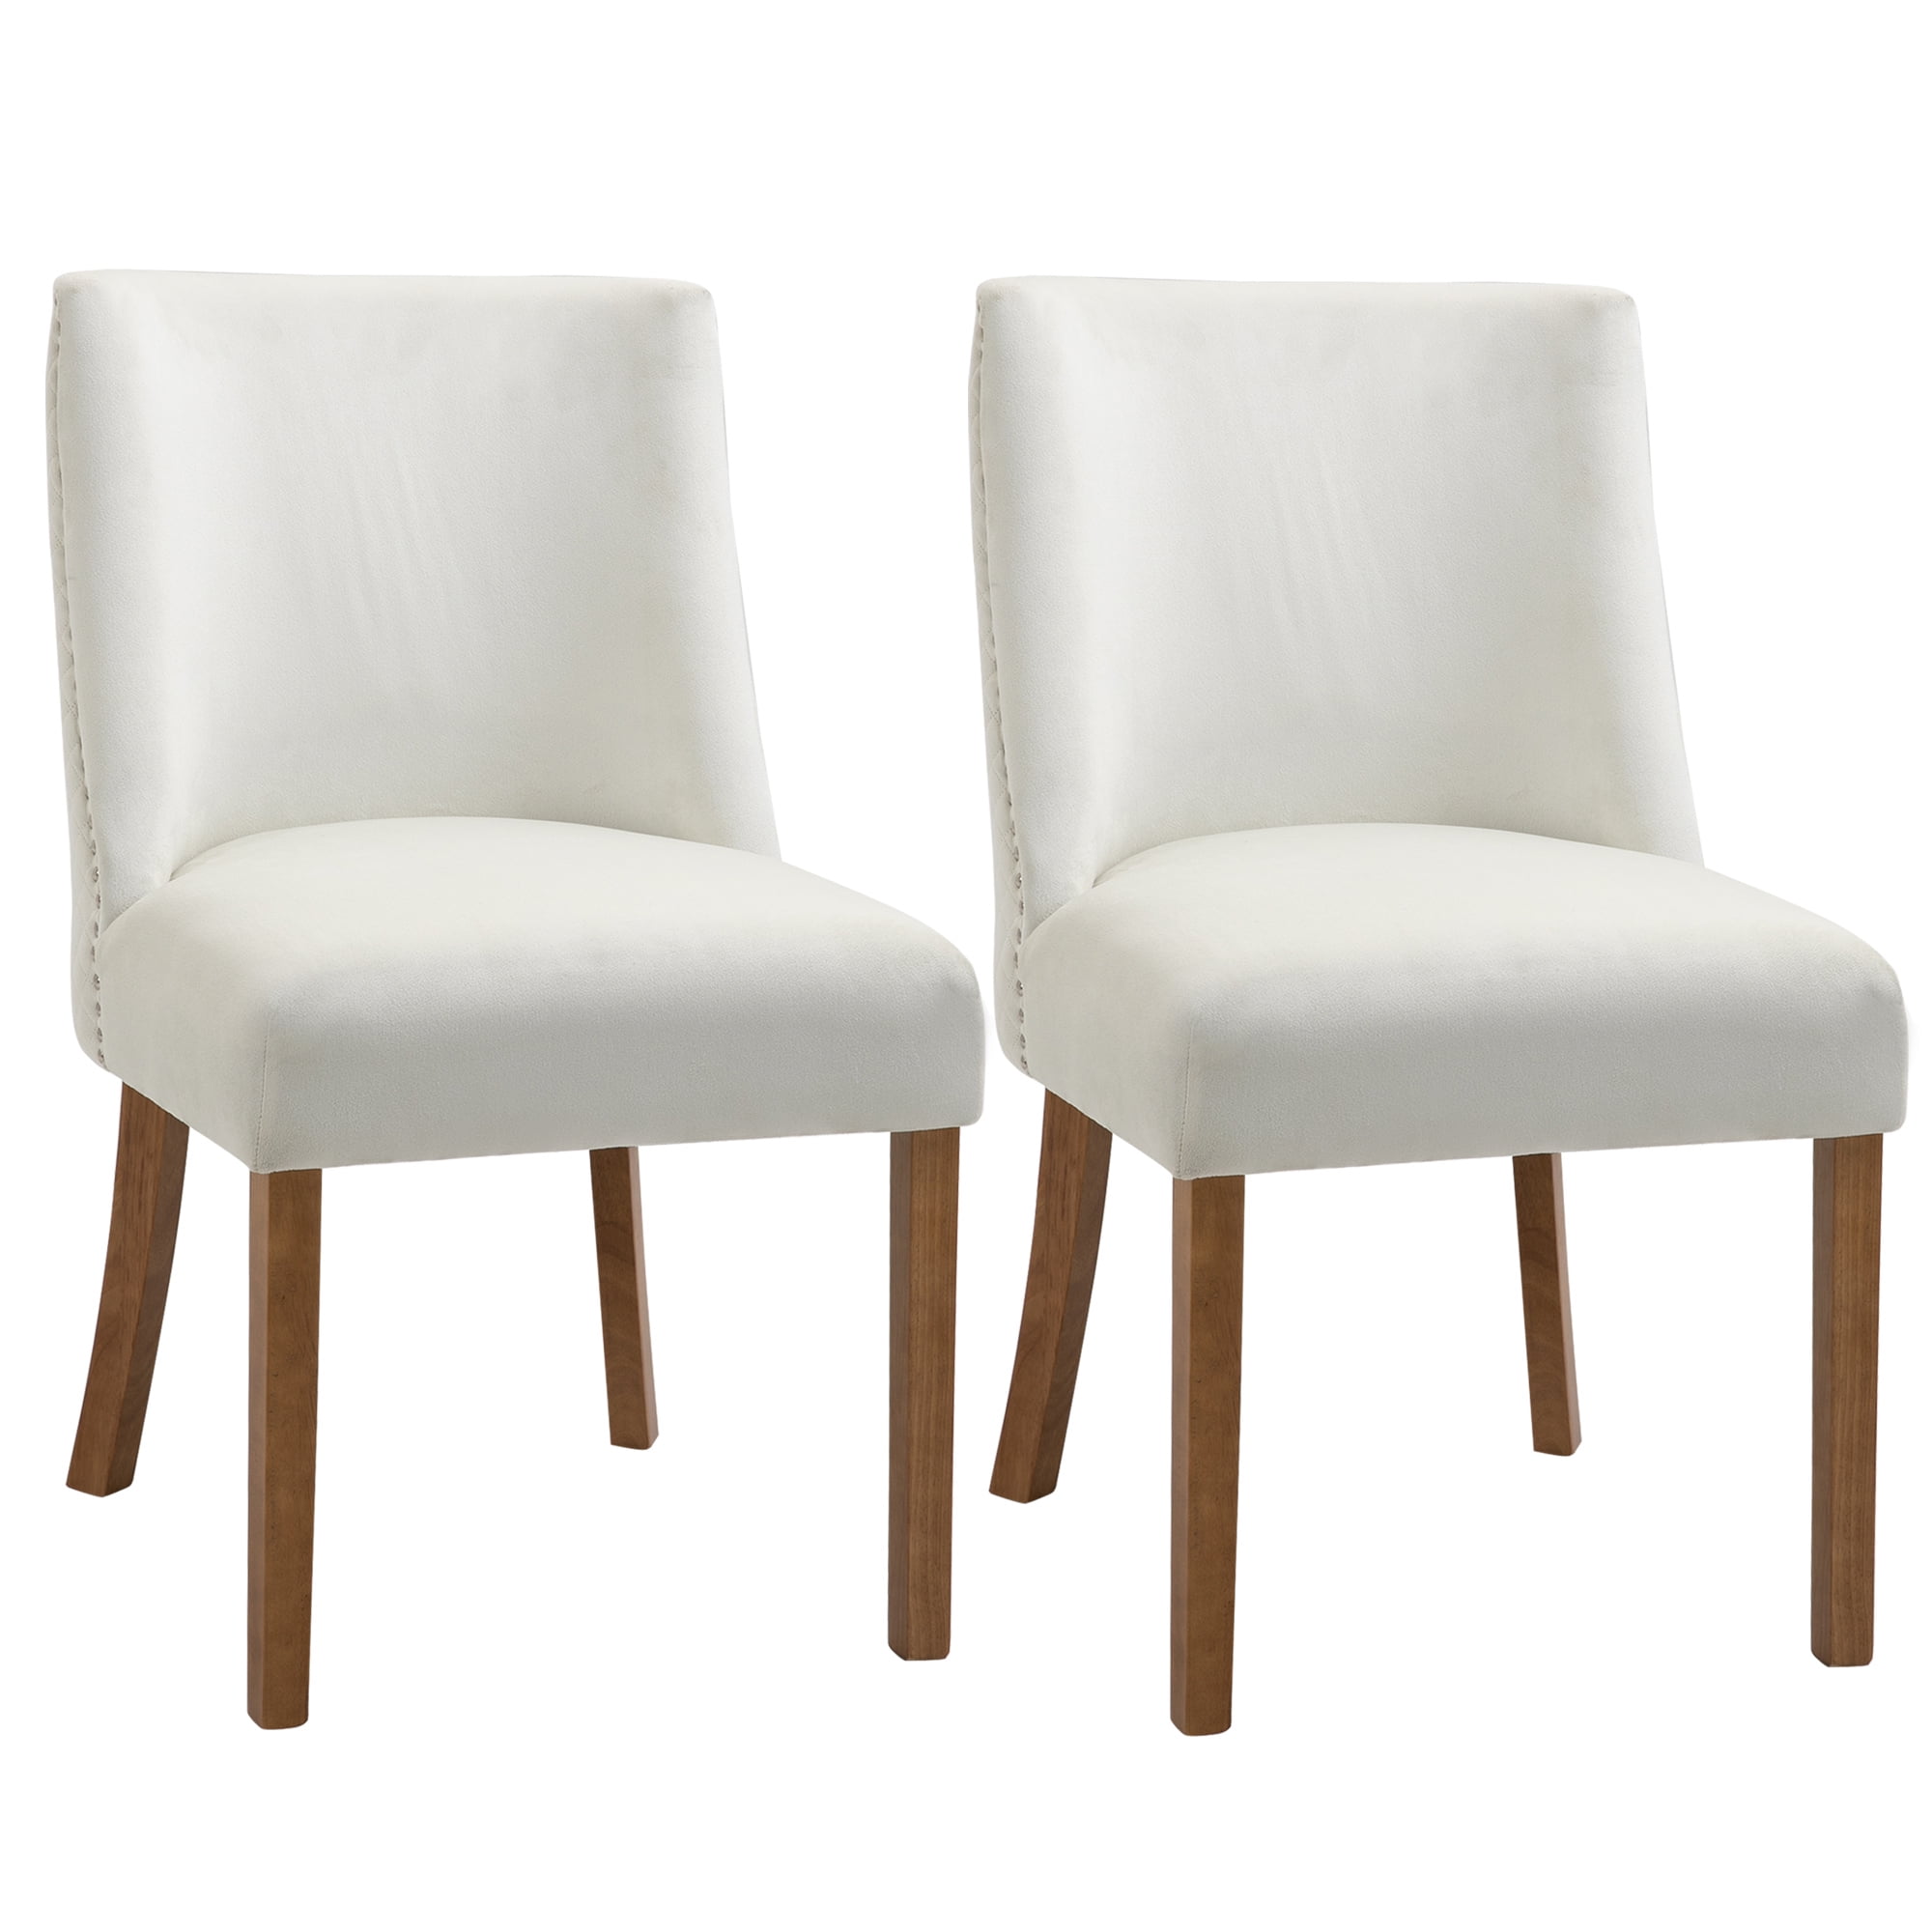 HOMCOM Set of 2 Modern Dining Chairs High Back Side Chairs with ...